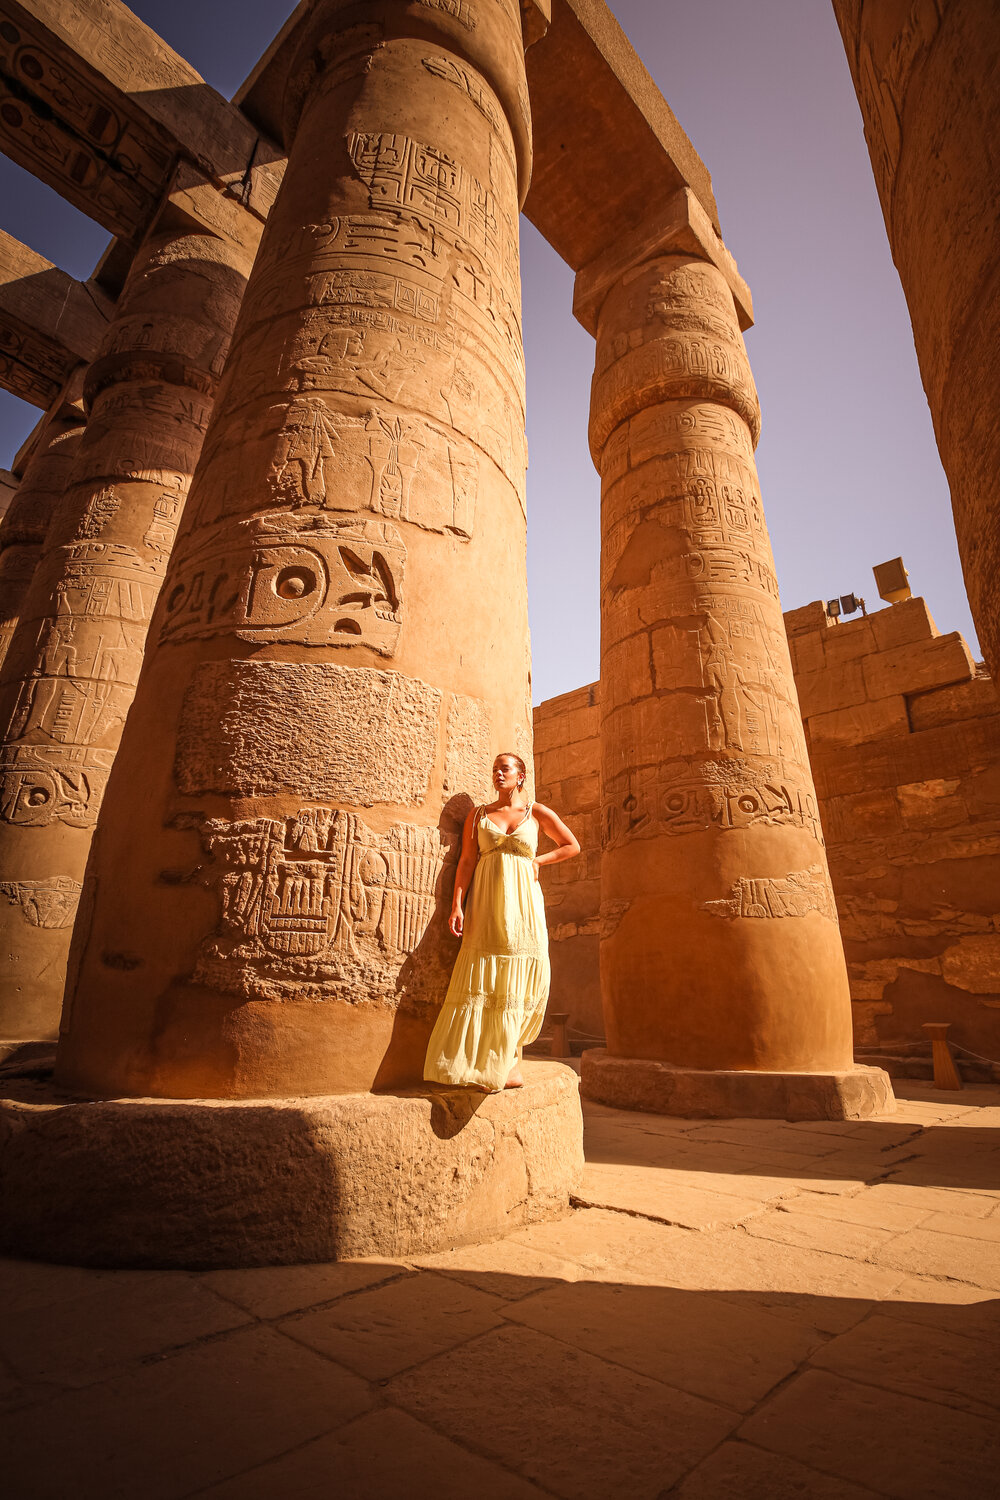 Traveling with Jessica in Luxor, Egypt